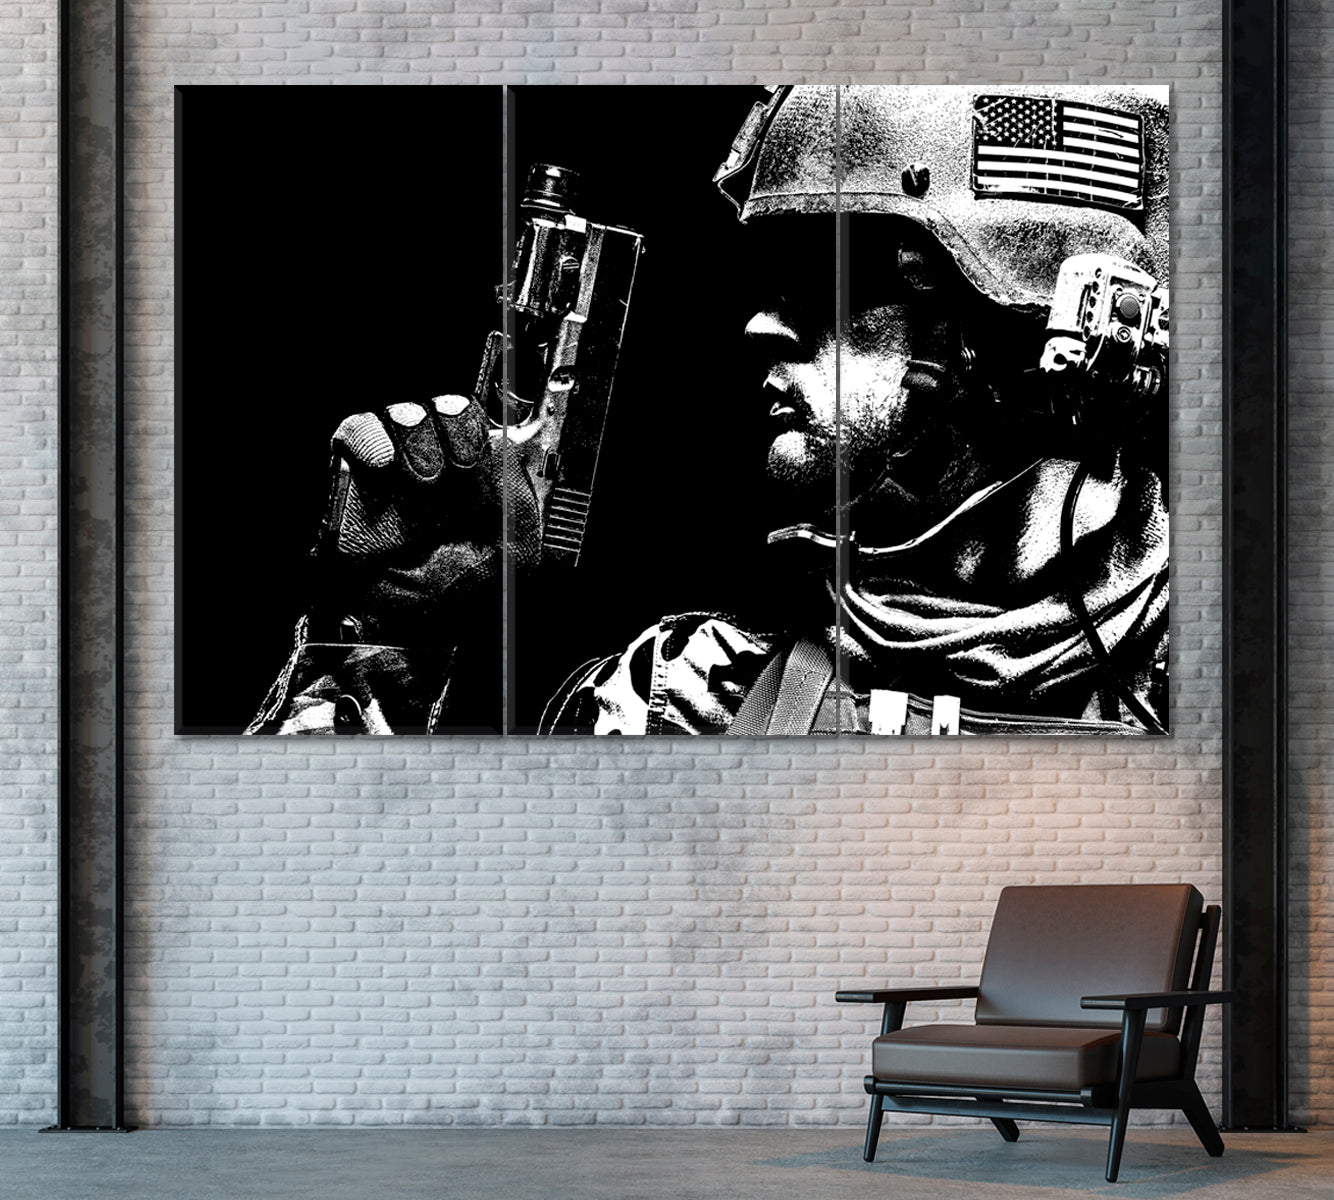 United States Marine Canvas Print ArtLexy 3 Panels 36"x24" inches 